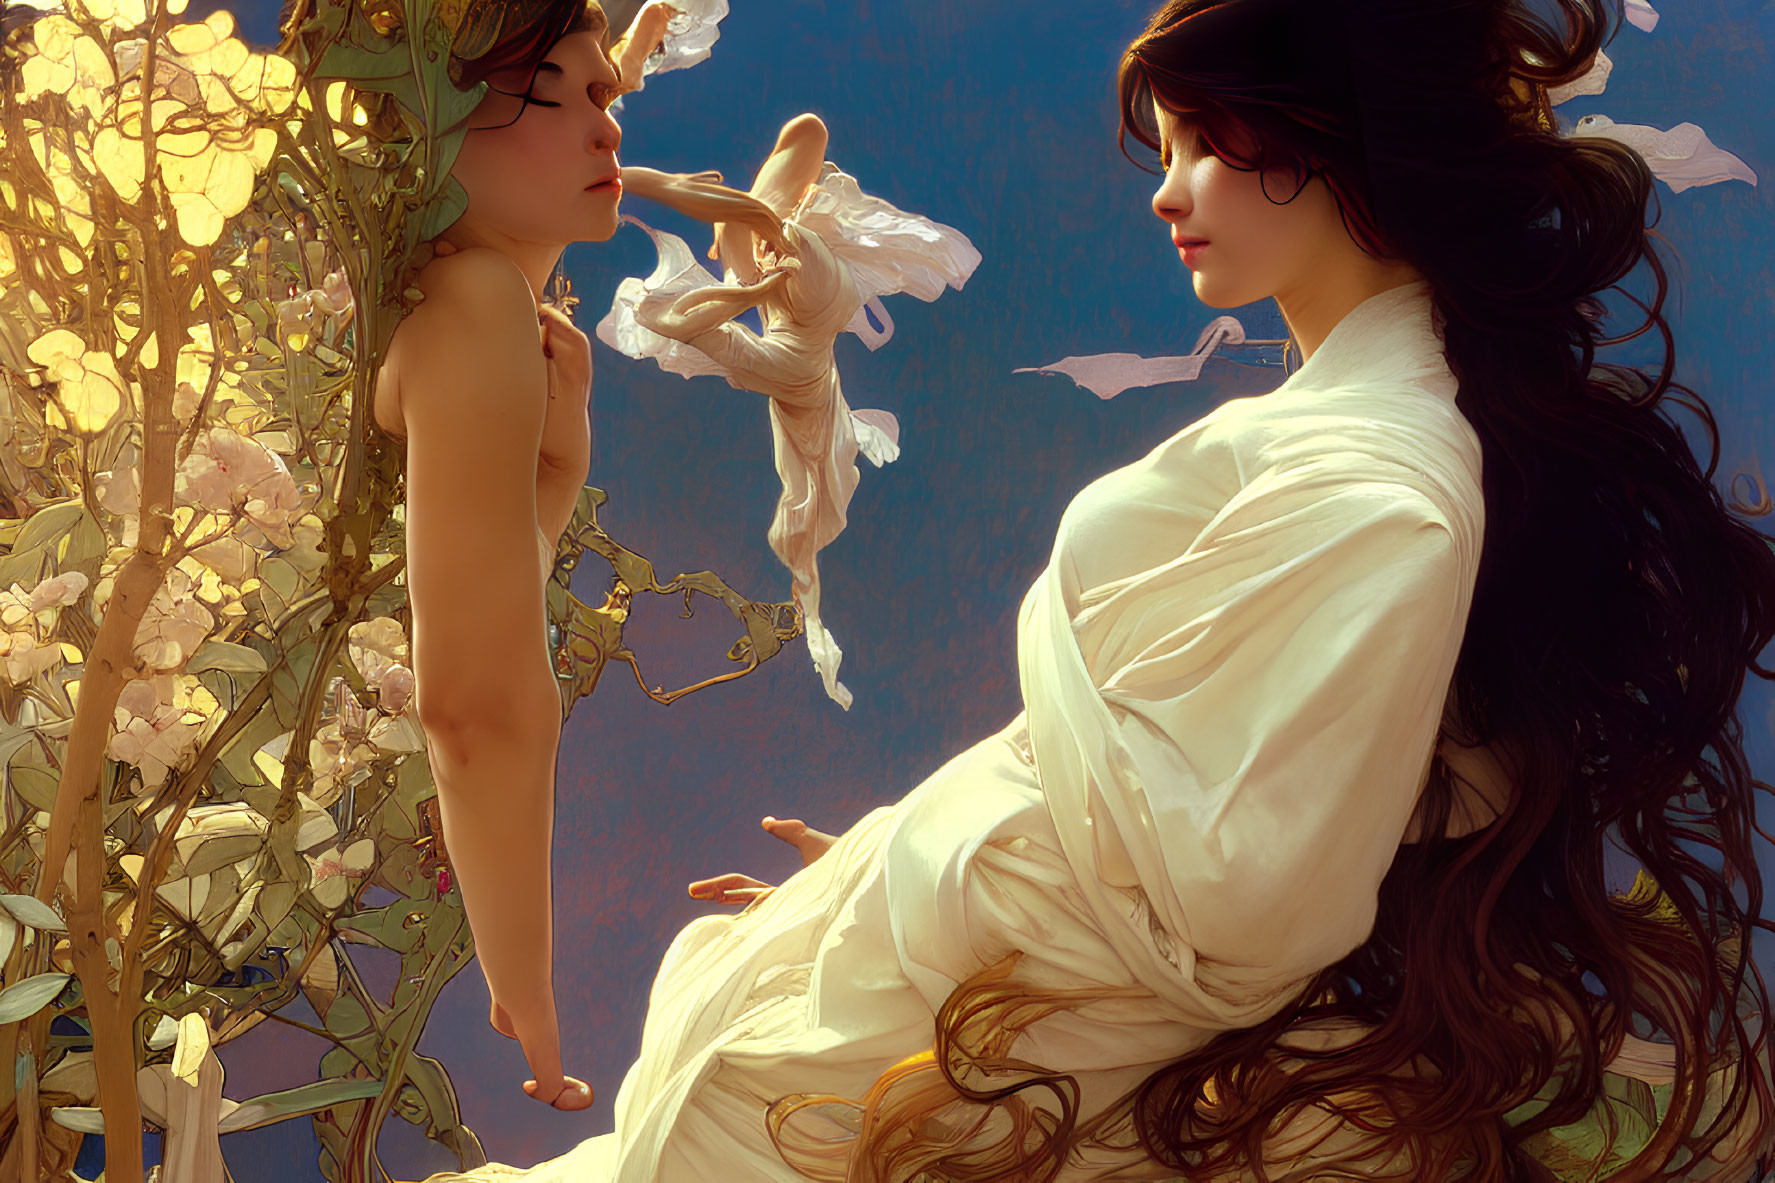 Woman in white dress gazes at winged creature among blooming flowers under golden light